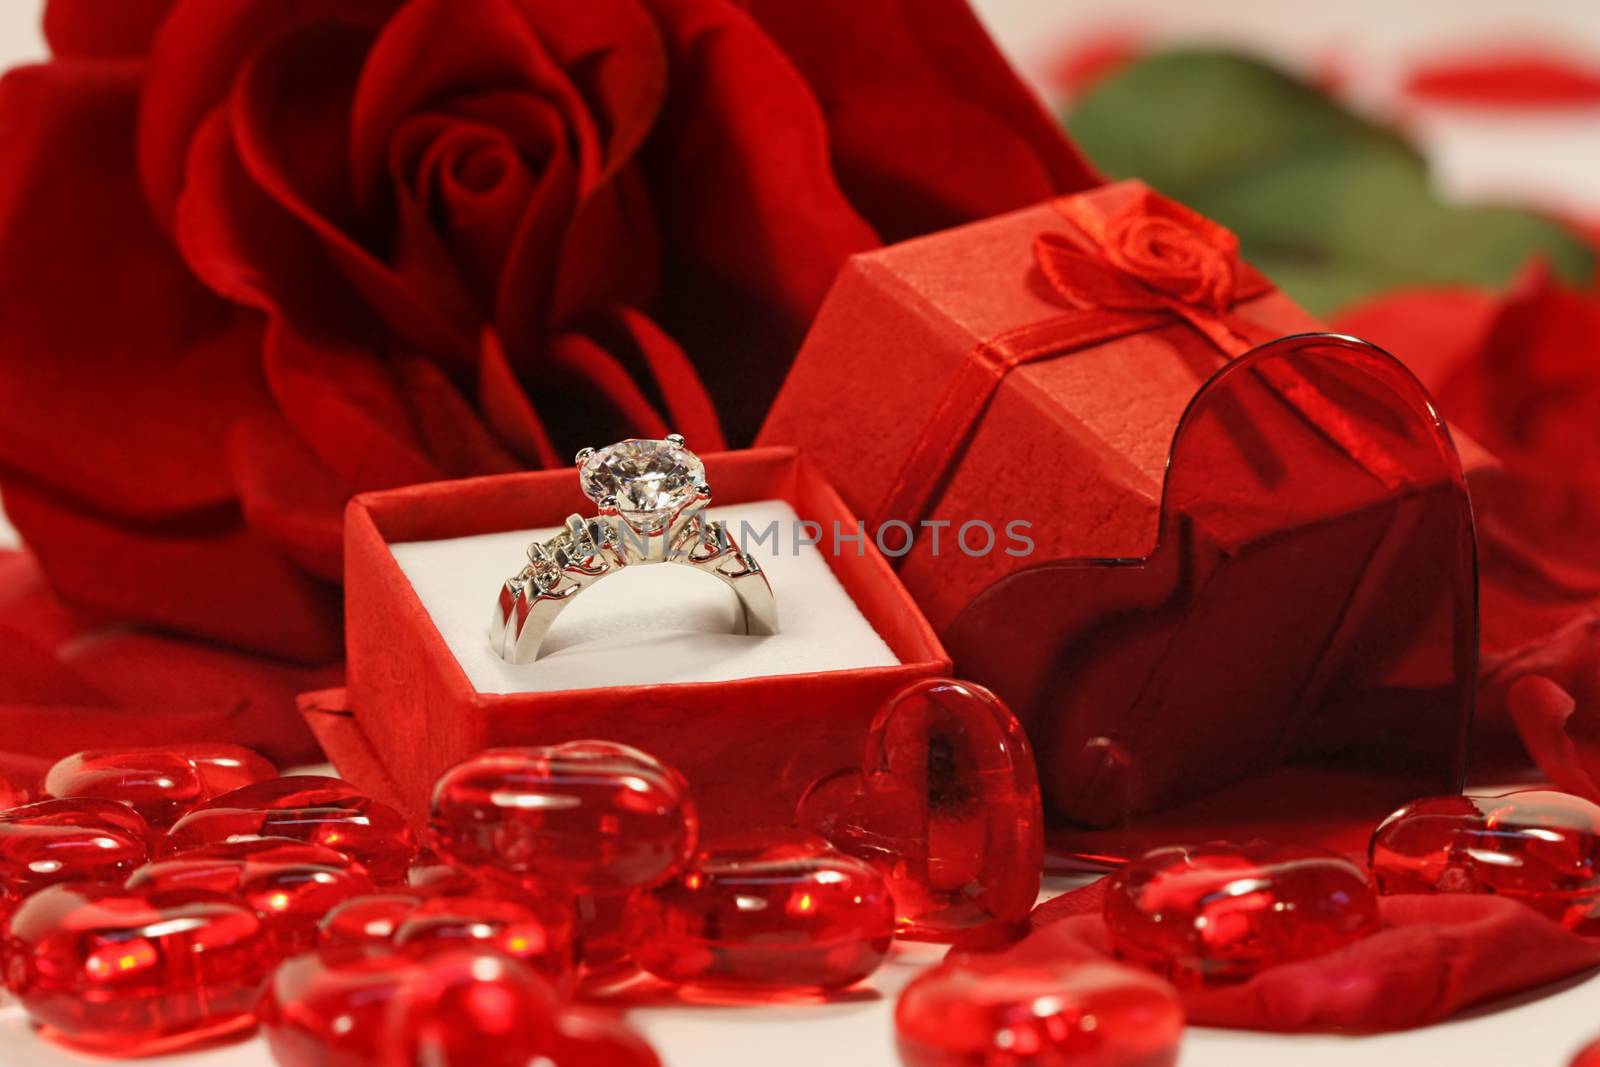 Red hearts and rose with wedding ring by Sandralise